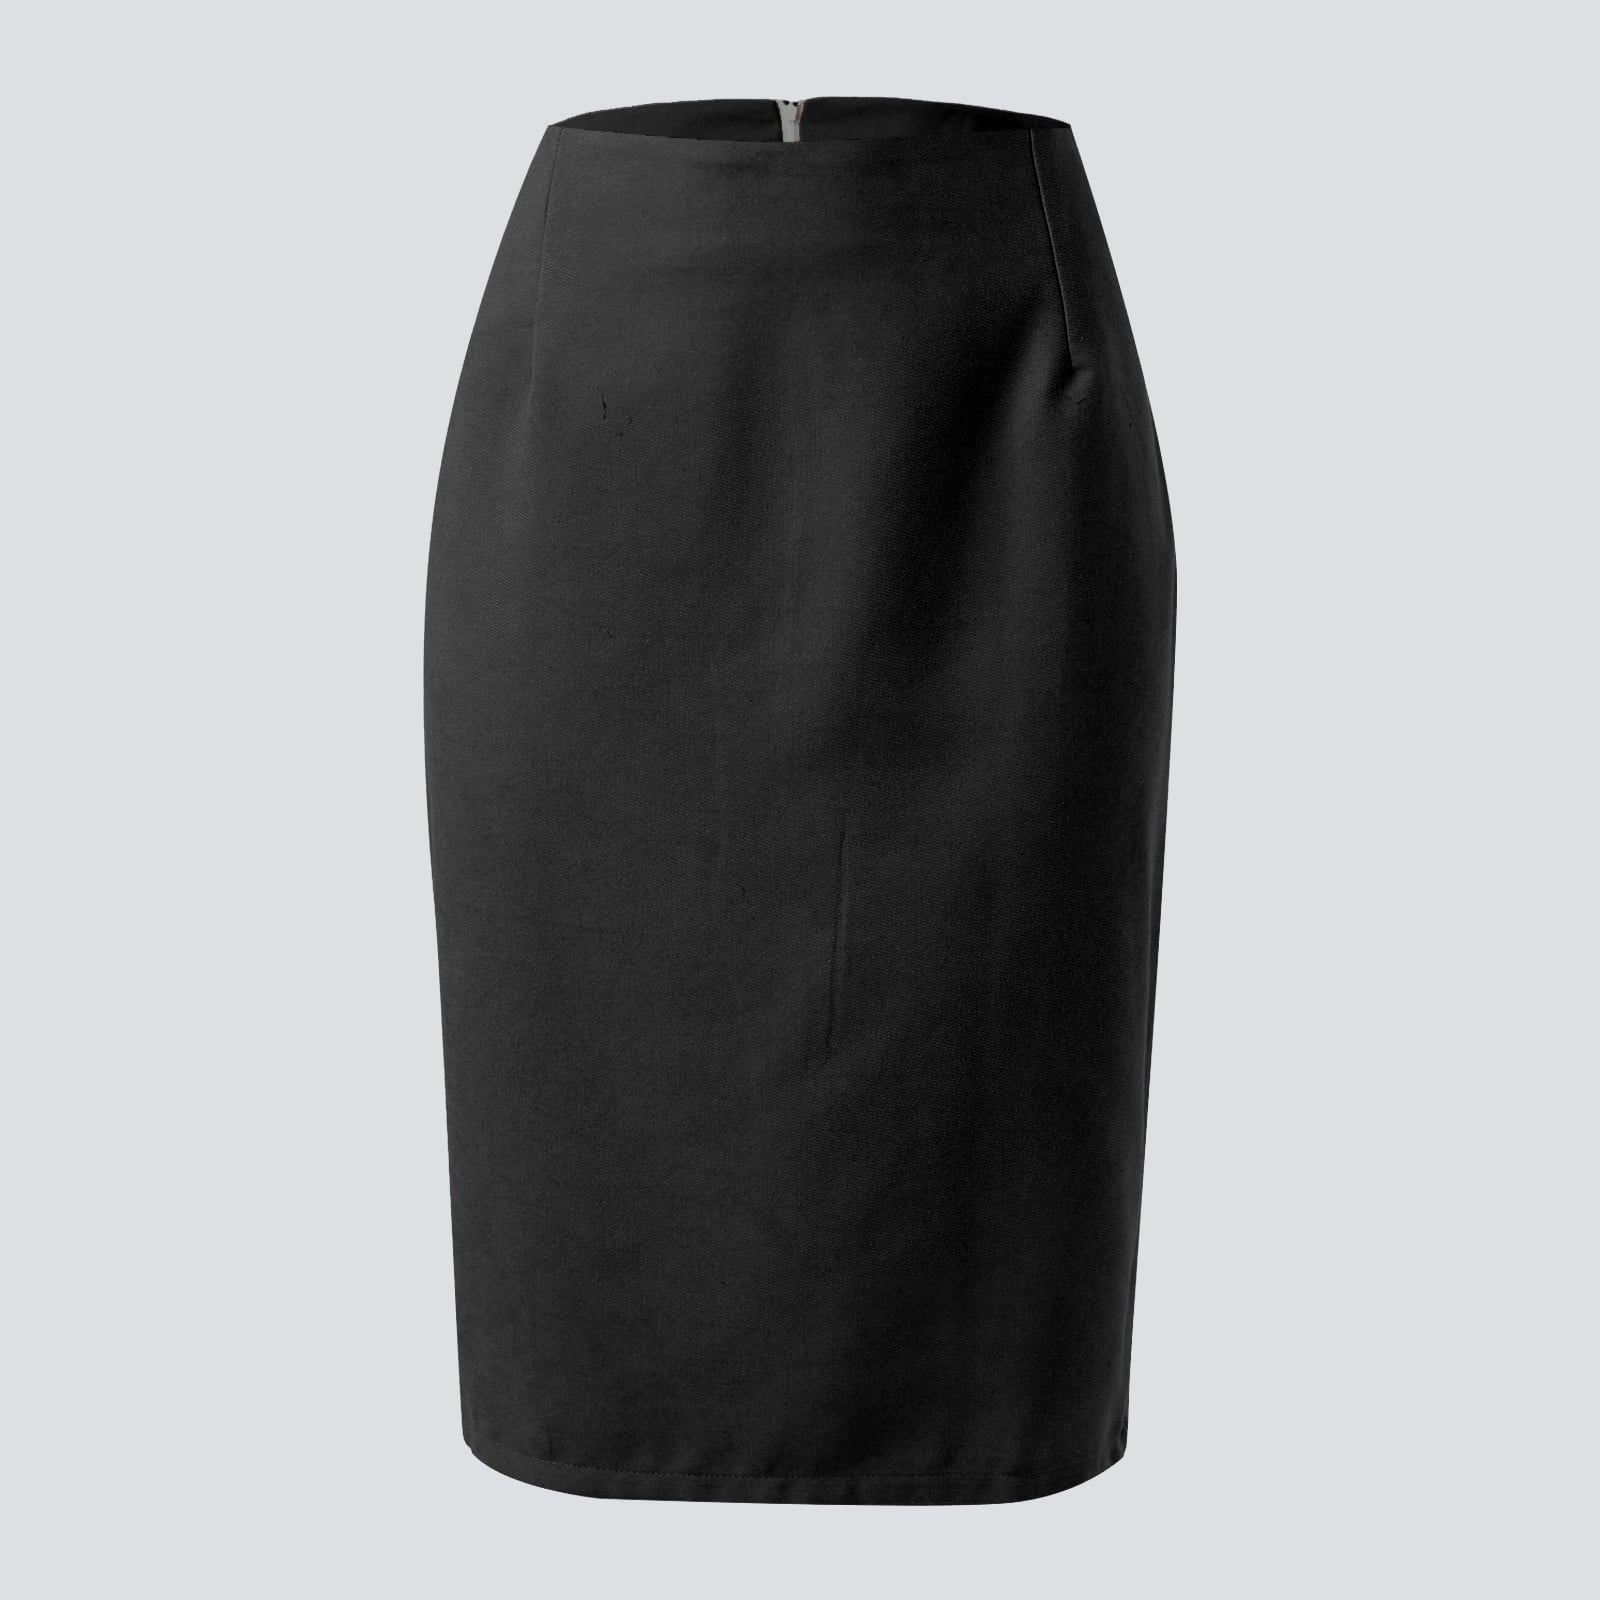 hcuribad Skirts for Women,Plaid Skirts Pencil Plaid Skirts For Women ...